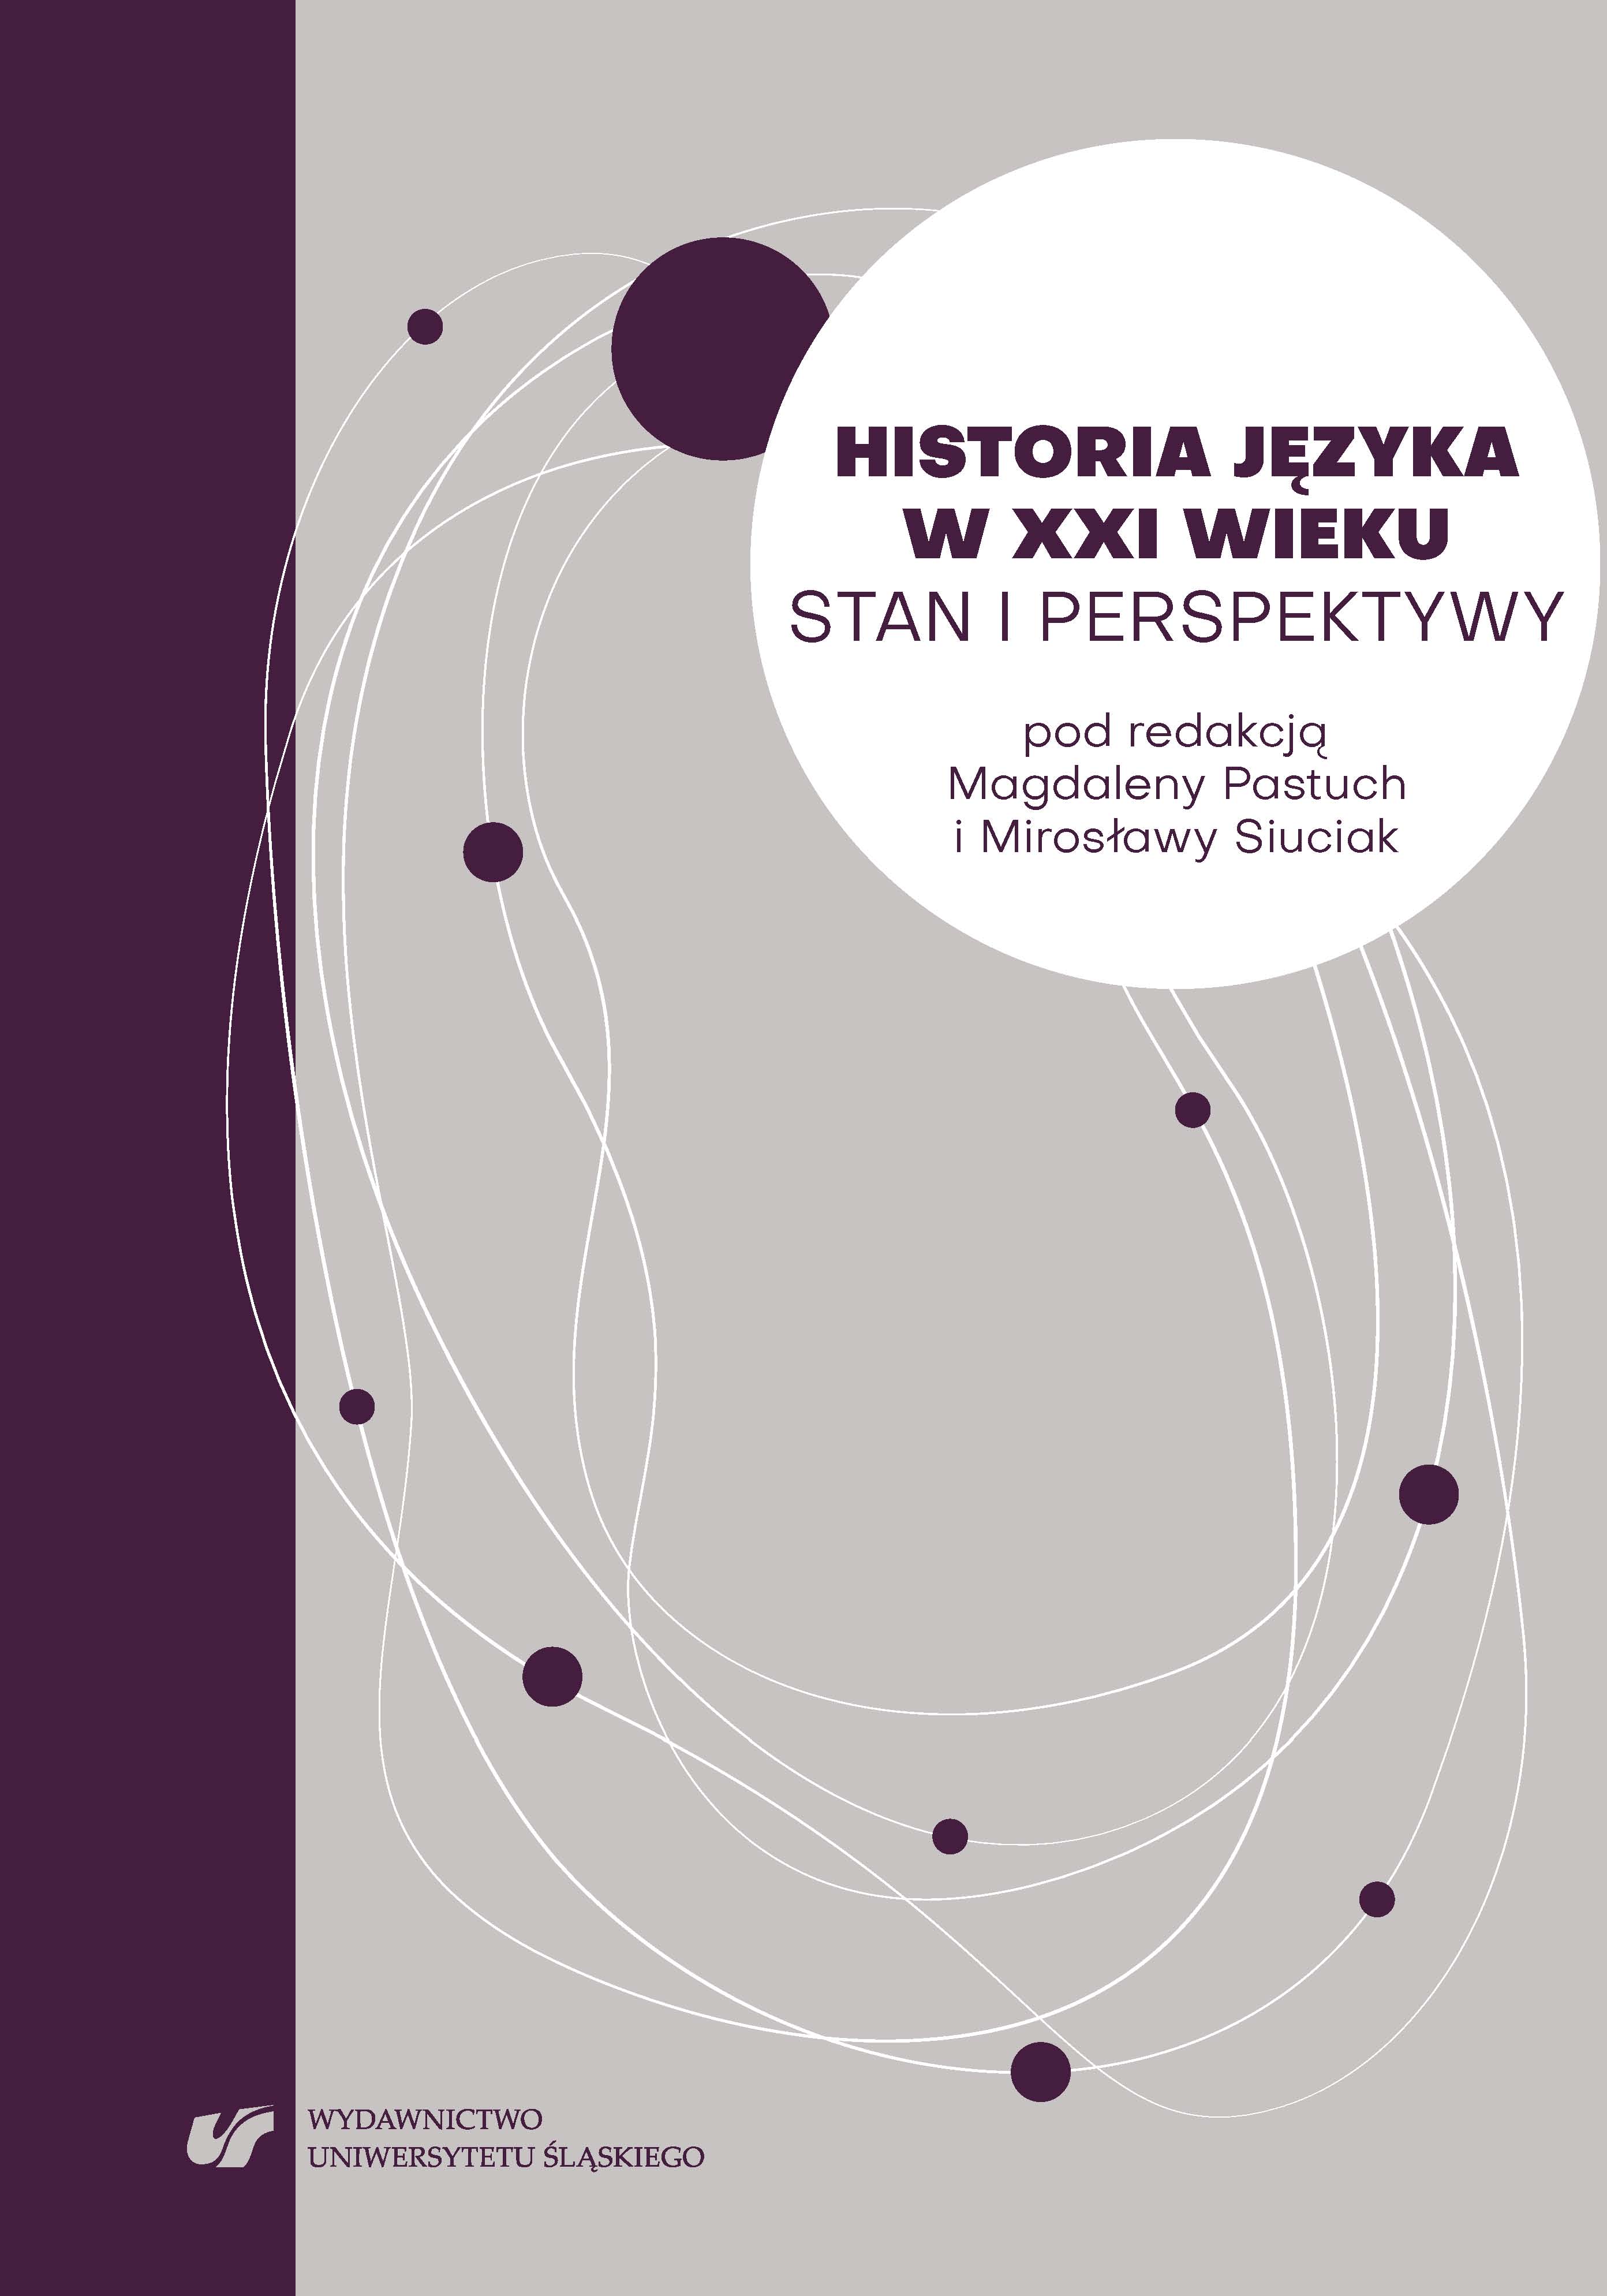 Research on bi- and multi-lingualism of prominent carriers of language in the space of Polish: A new subfield of linguistic history? Cover Image